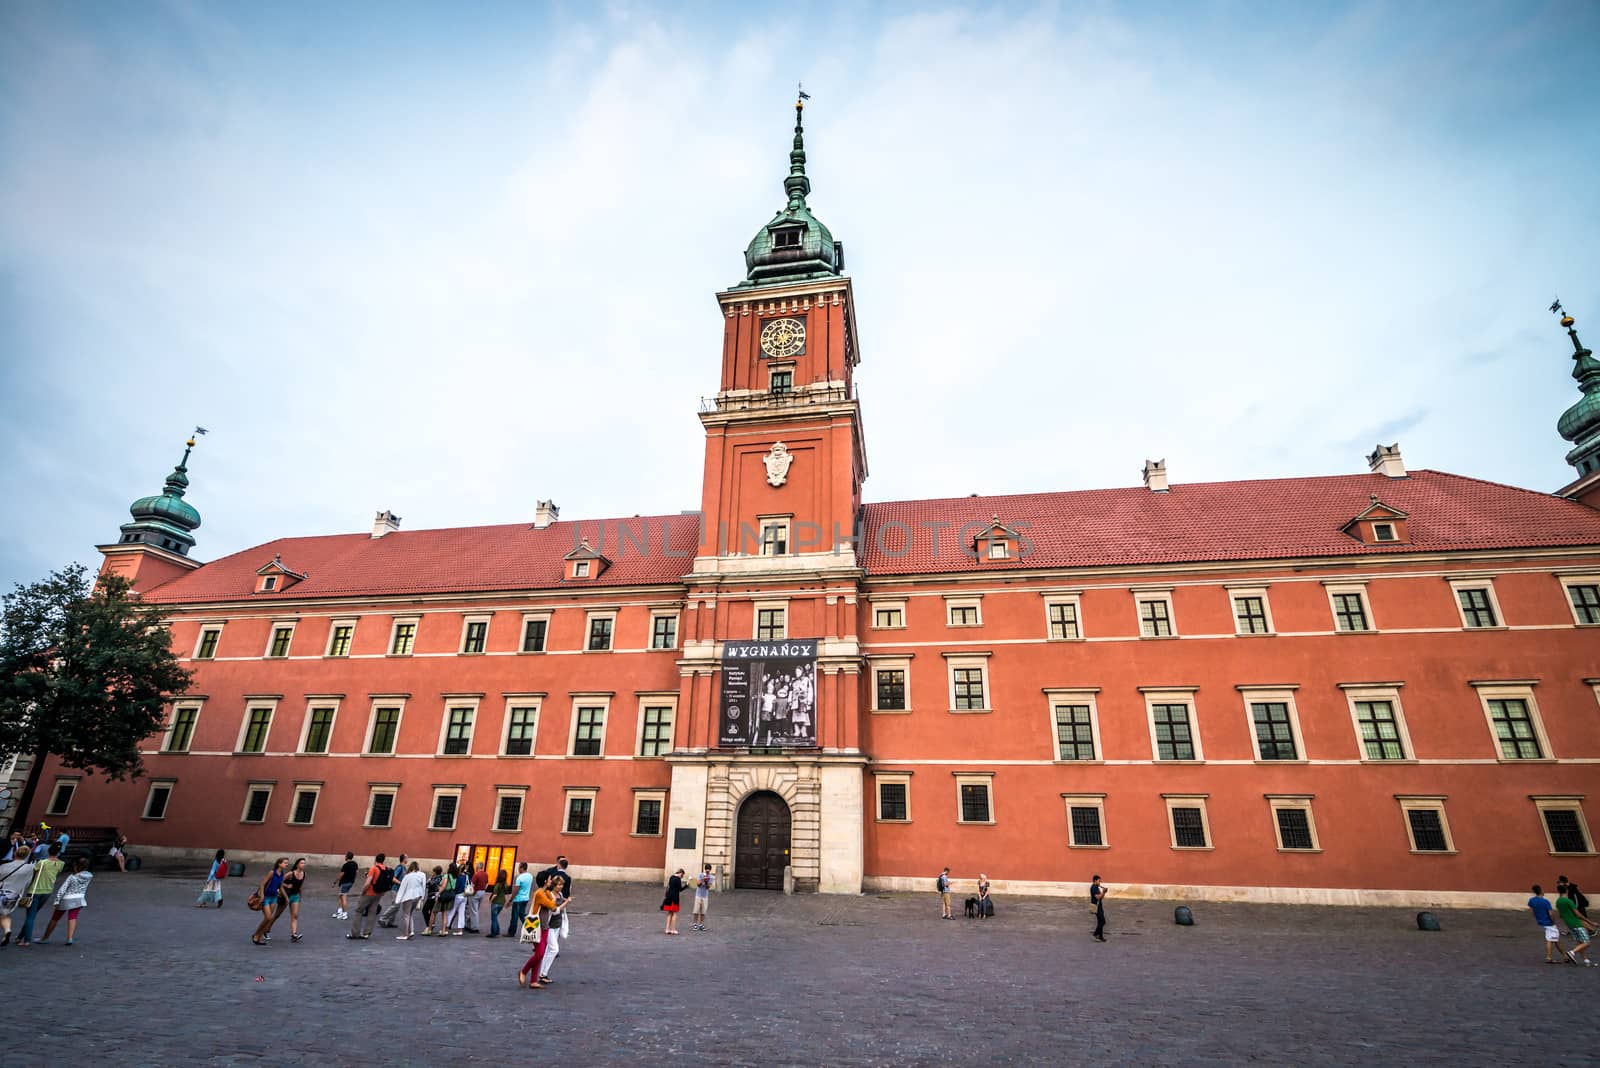 WARSAW, POLAND - AUGUST 20: Castle Square in Warsaw on August 20, 2013 in Warsaw, Poland. Warsaw's Old Town is listed by UNESCO as a monument of international importance.